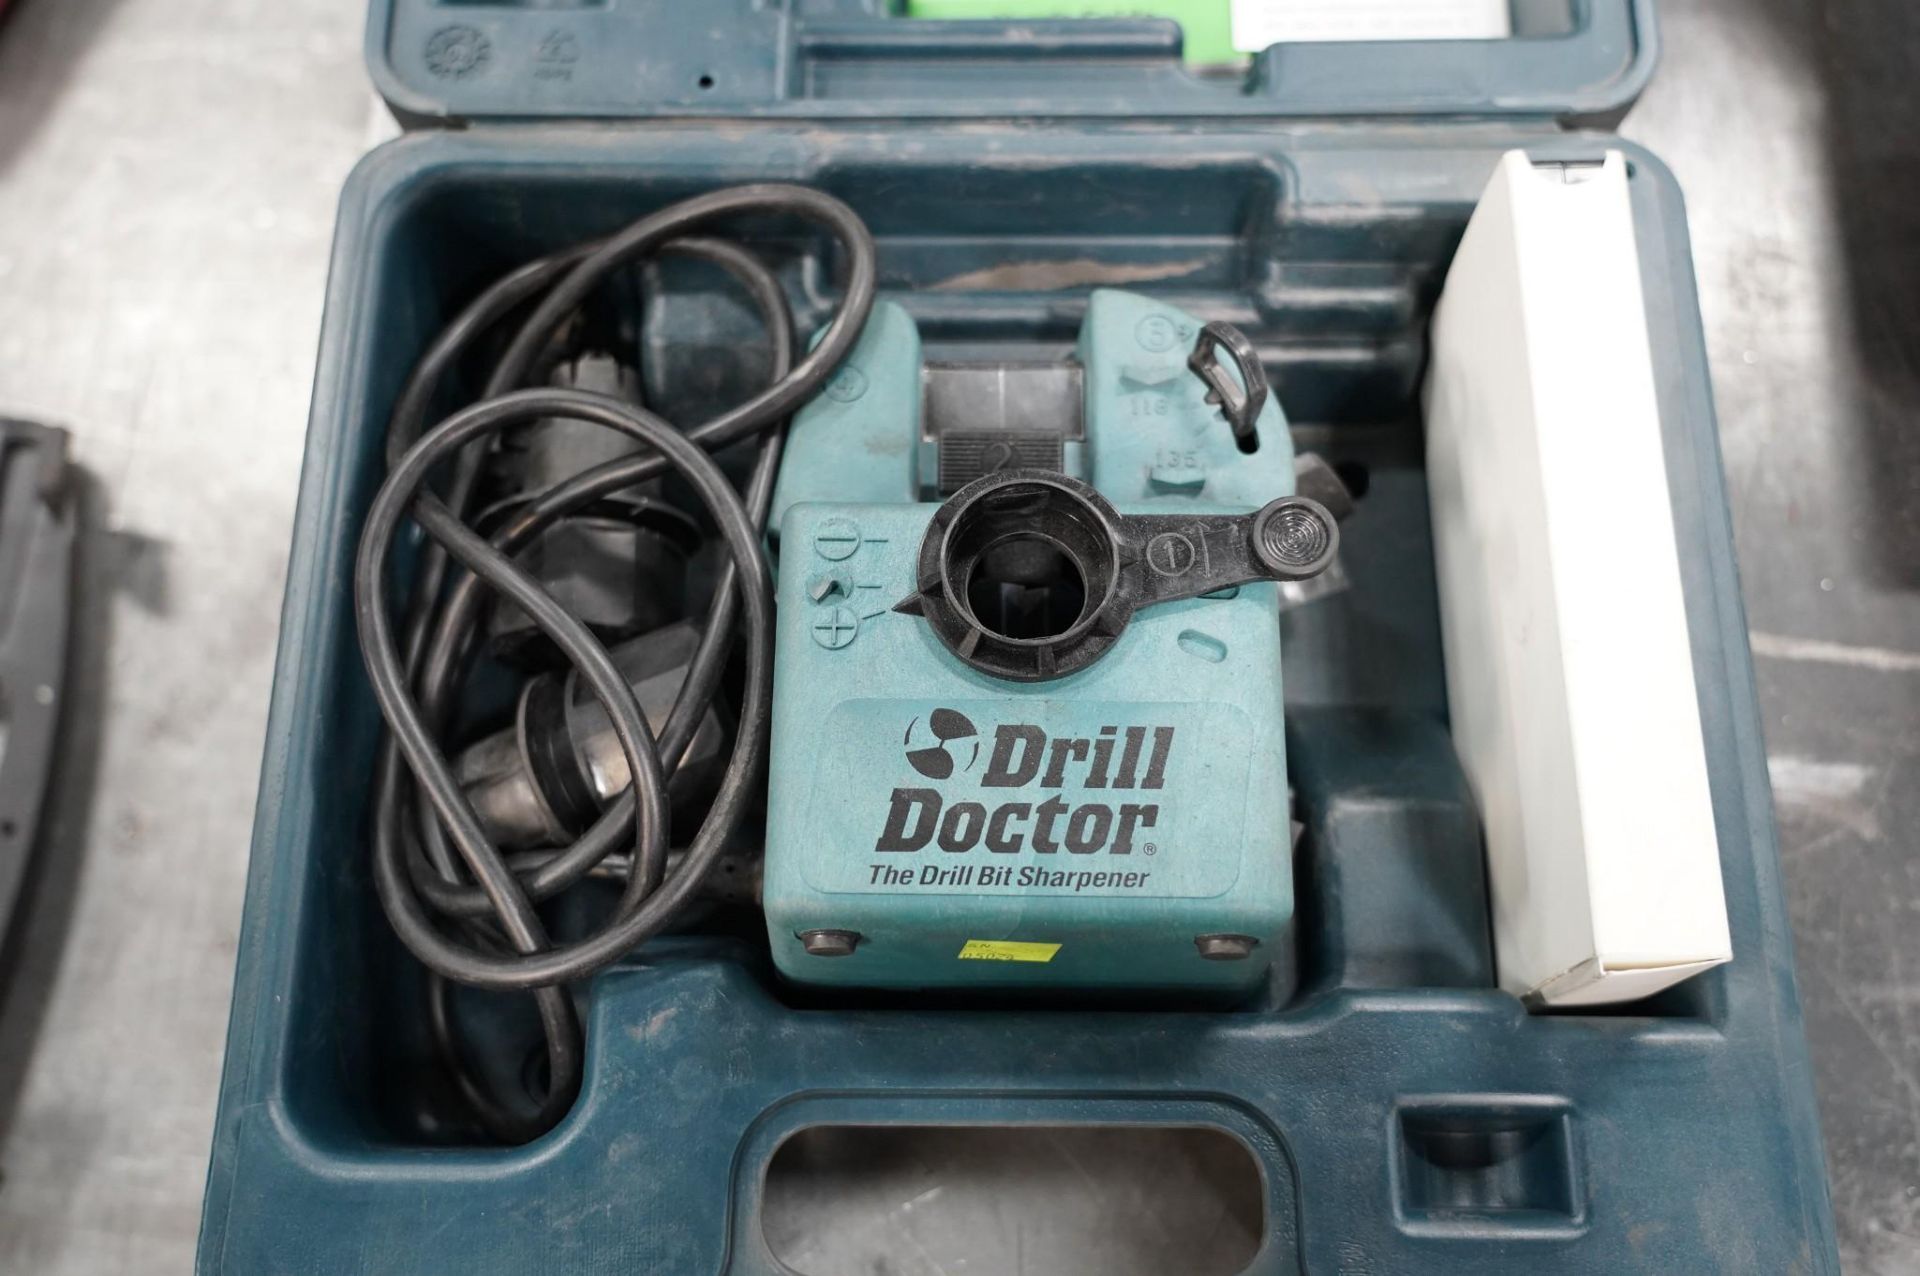 DRILL DOCTOR 750 ELECTRIC DRILL SHARPENER - Image 2 of 4